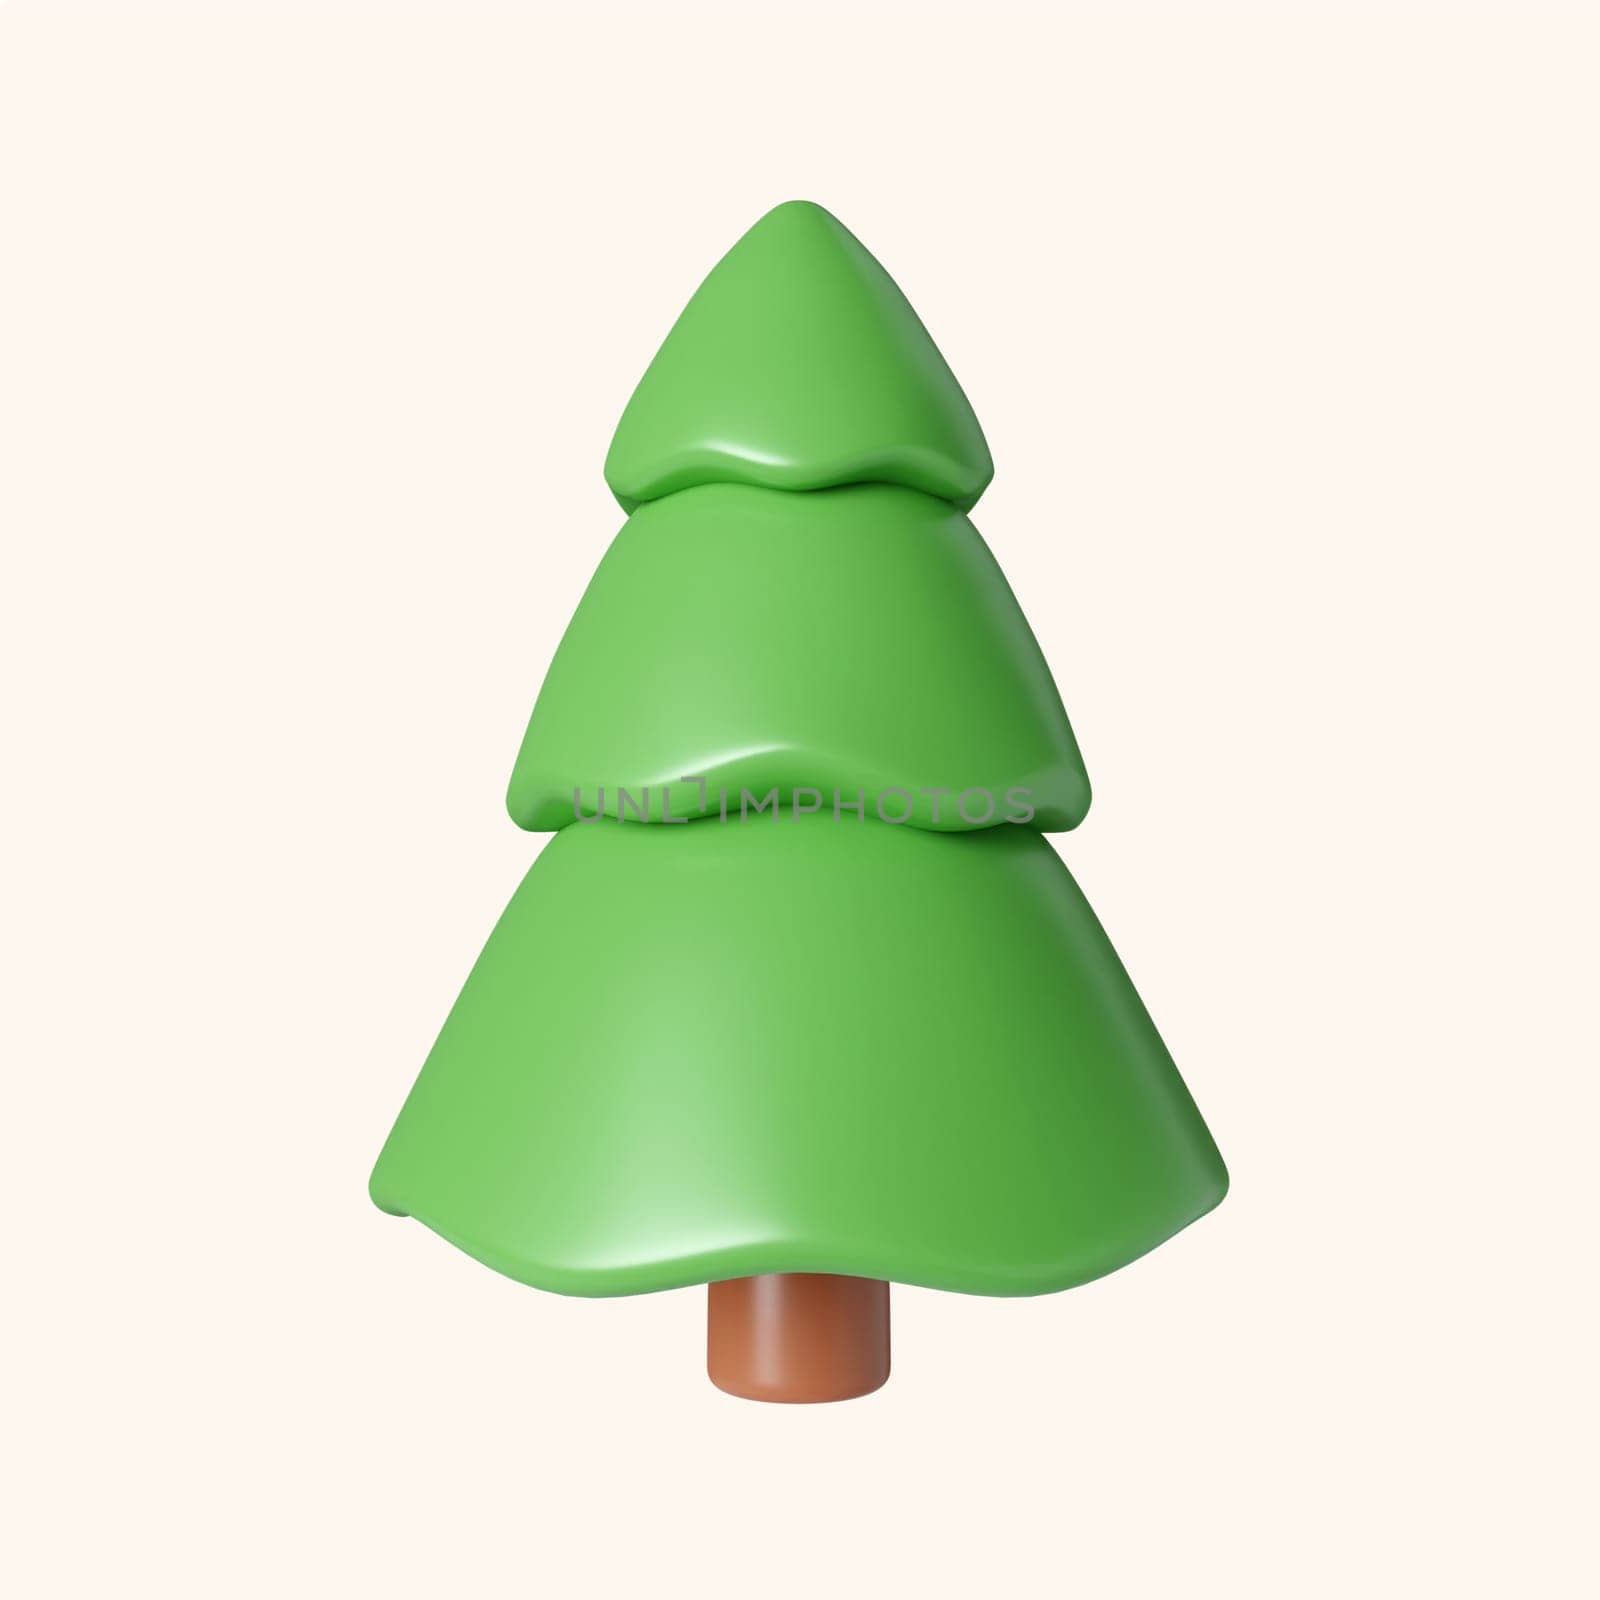 3d Christmas tree. minimal decorative festive conical shape tree. New Year's holiday decor. 3d design element In cartoon style. Icon isolated on white background. 3D illustration by meepiangraphic